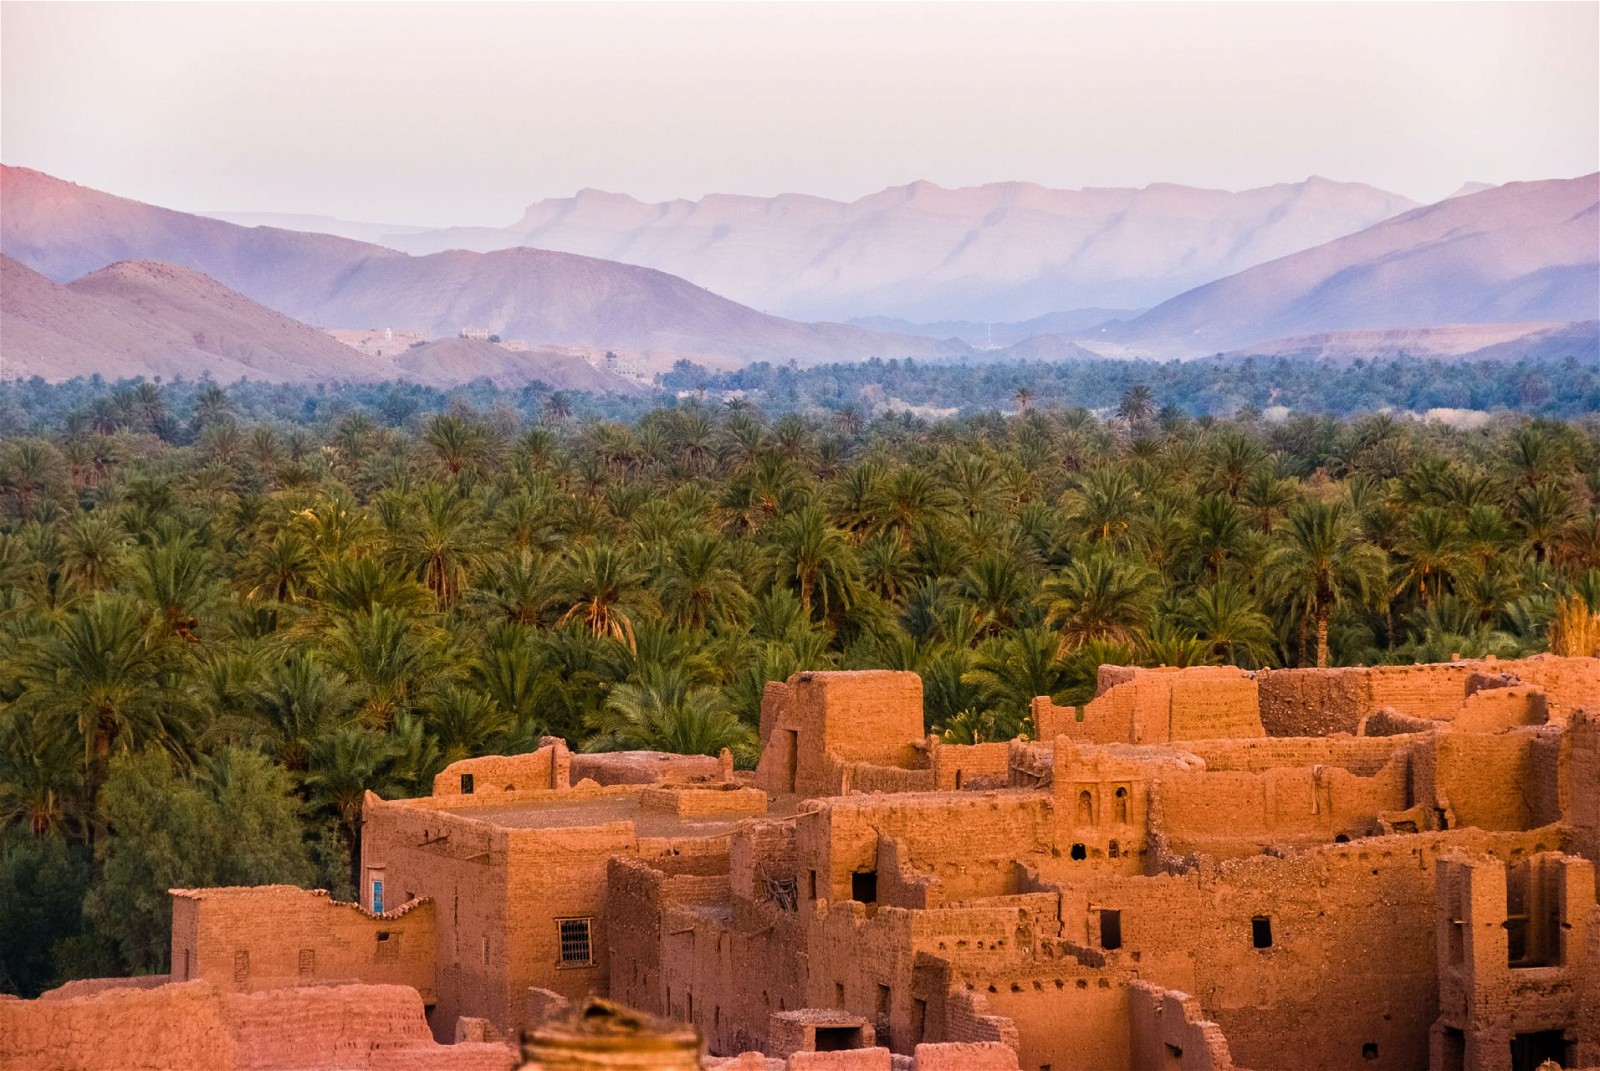 Ouarzazate: Known as the 